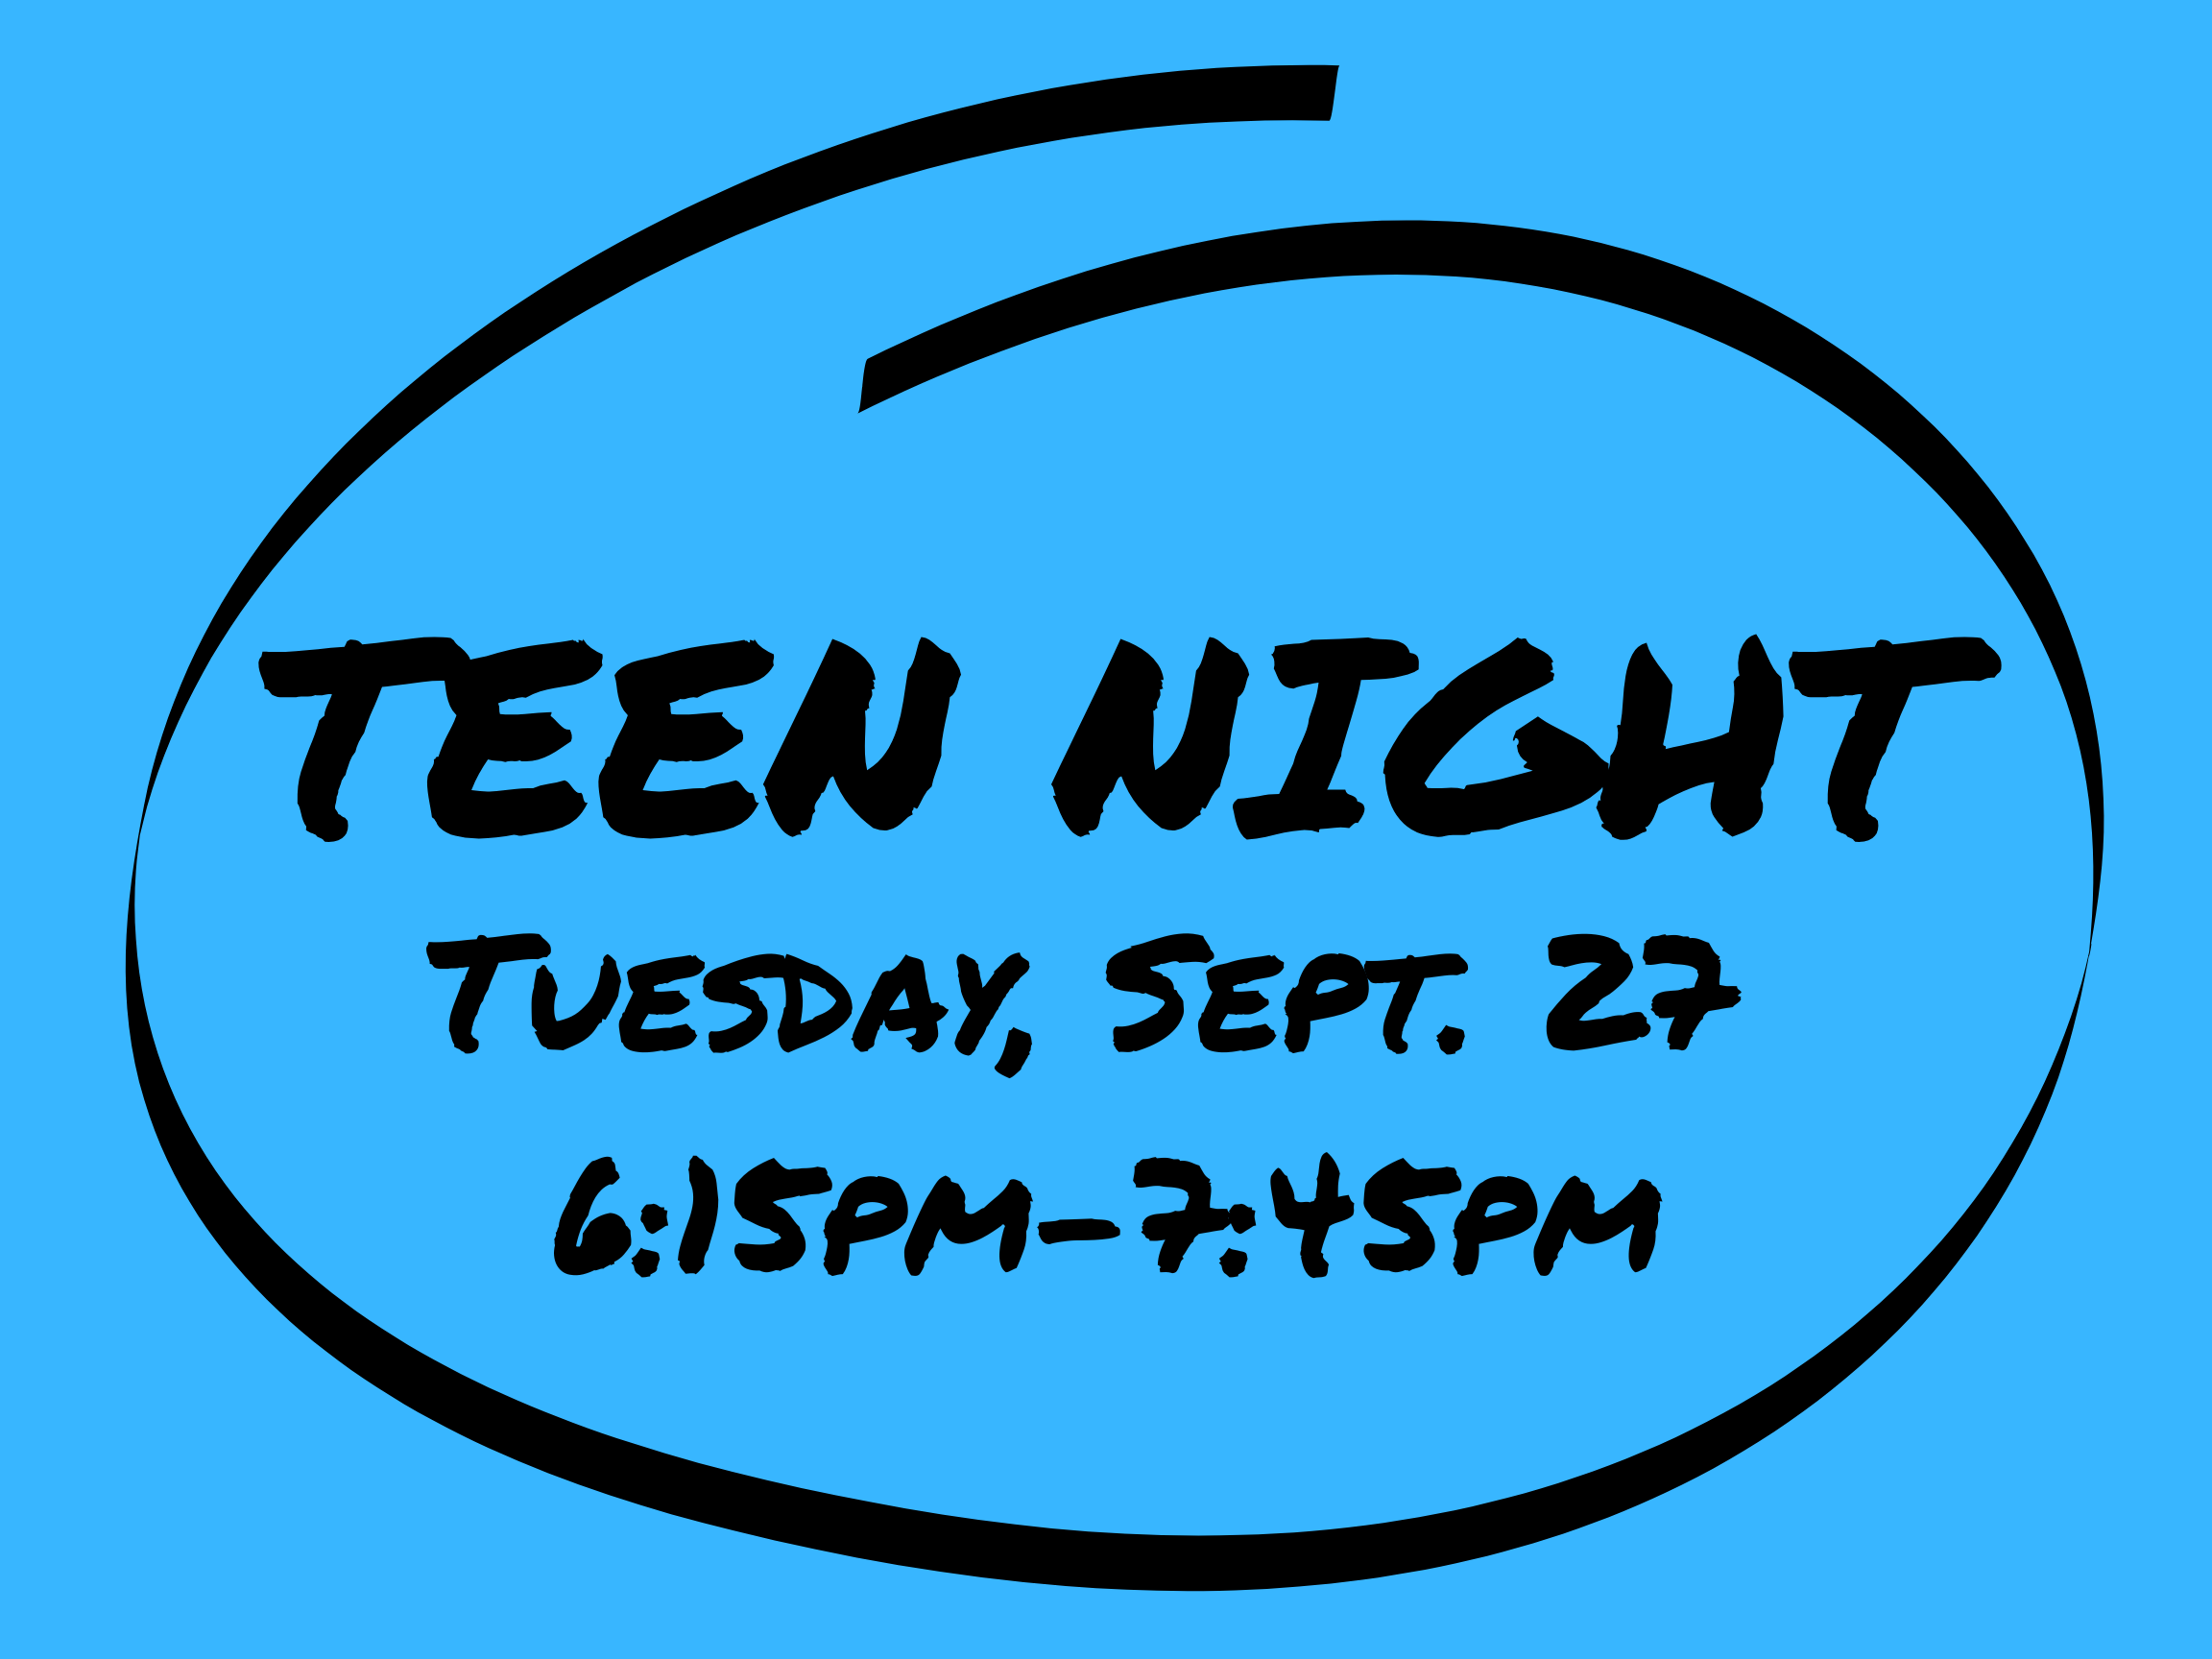 picture of "teen night" circled on calendar